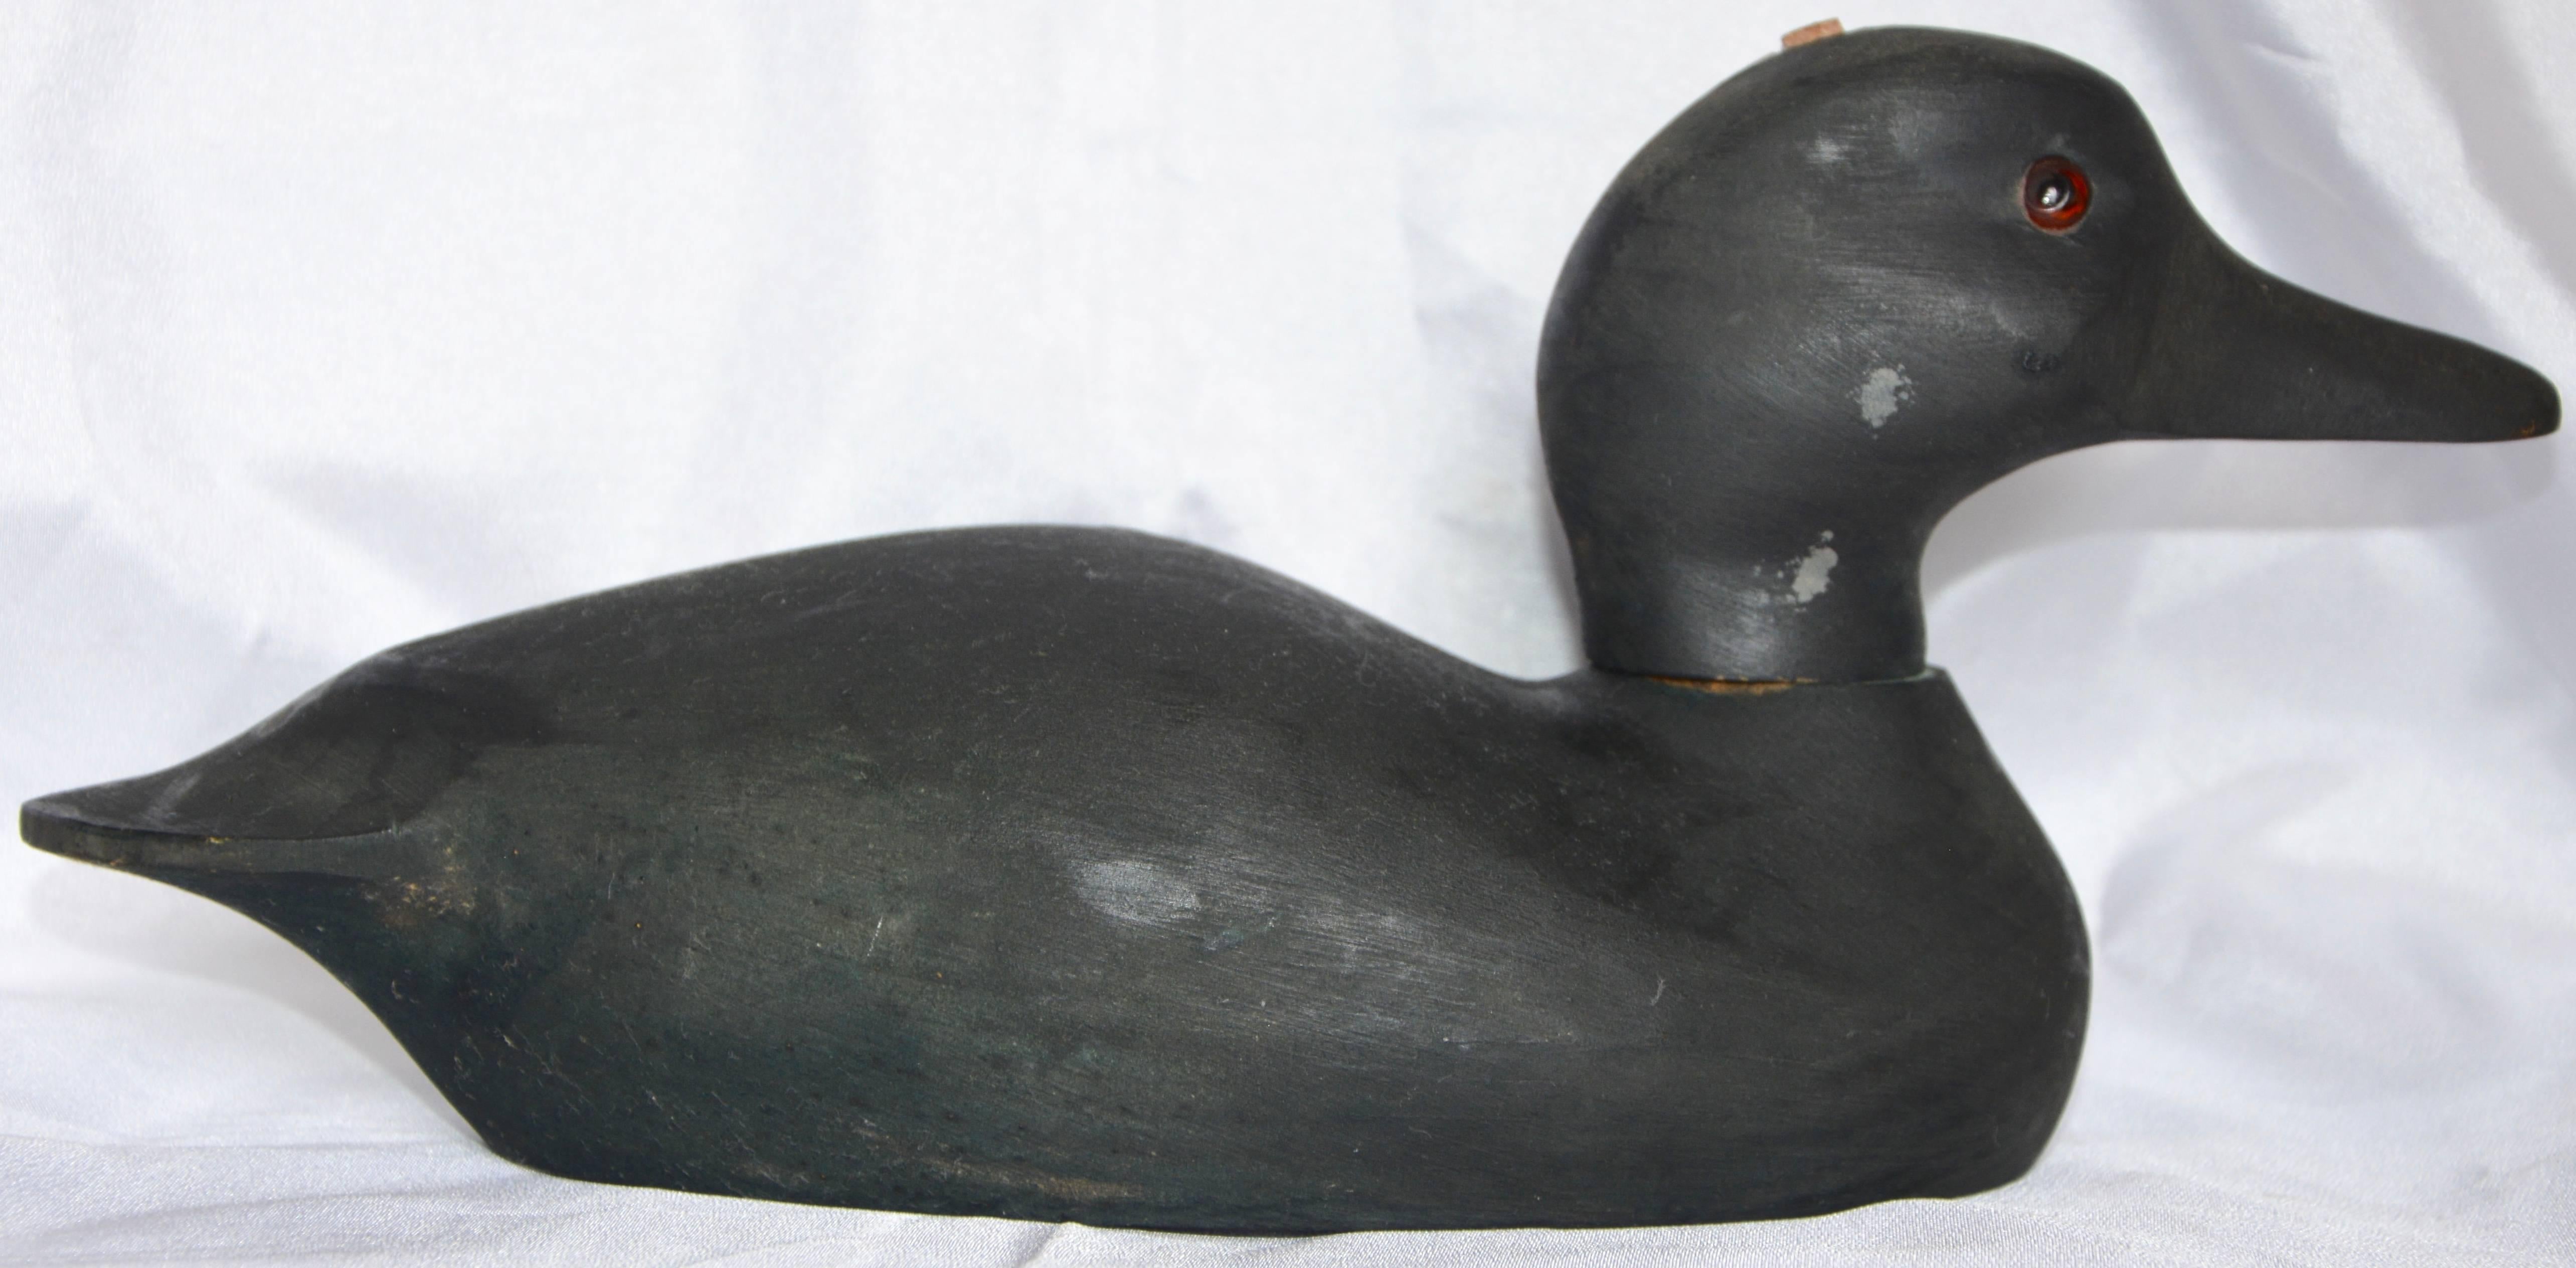 This unique duck decoy has a head that swivels. He is finished in a matte black paint with amber eyes. This will be a nice addition to your decoy collection.